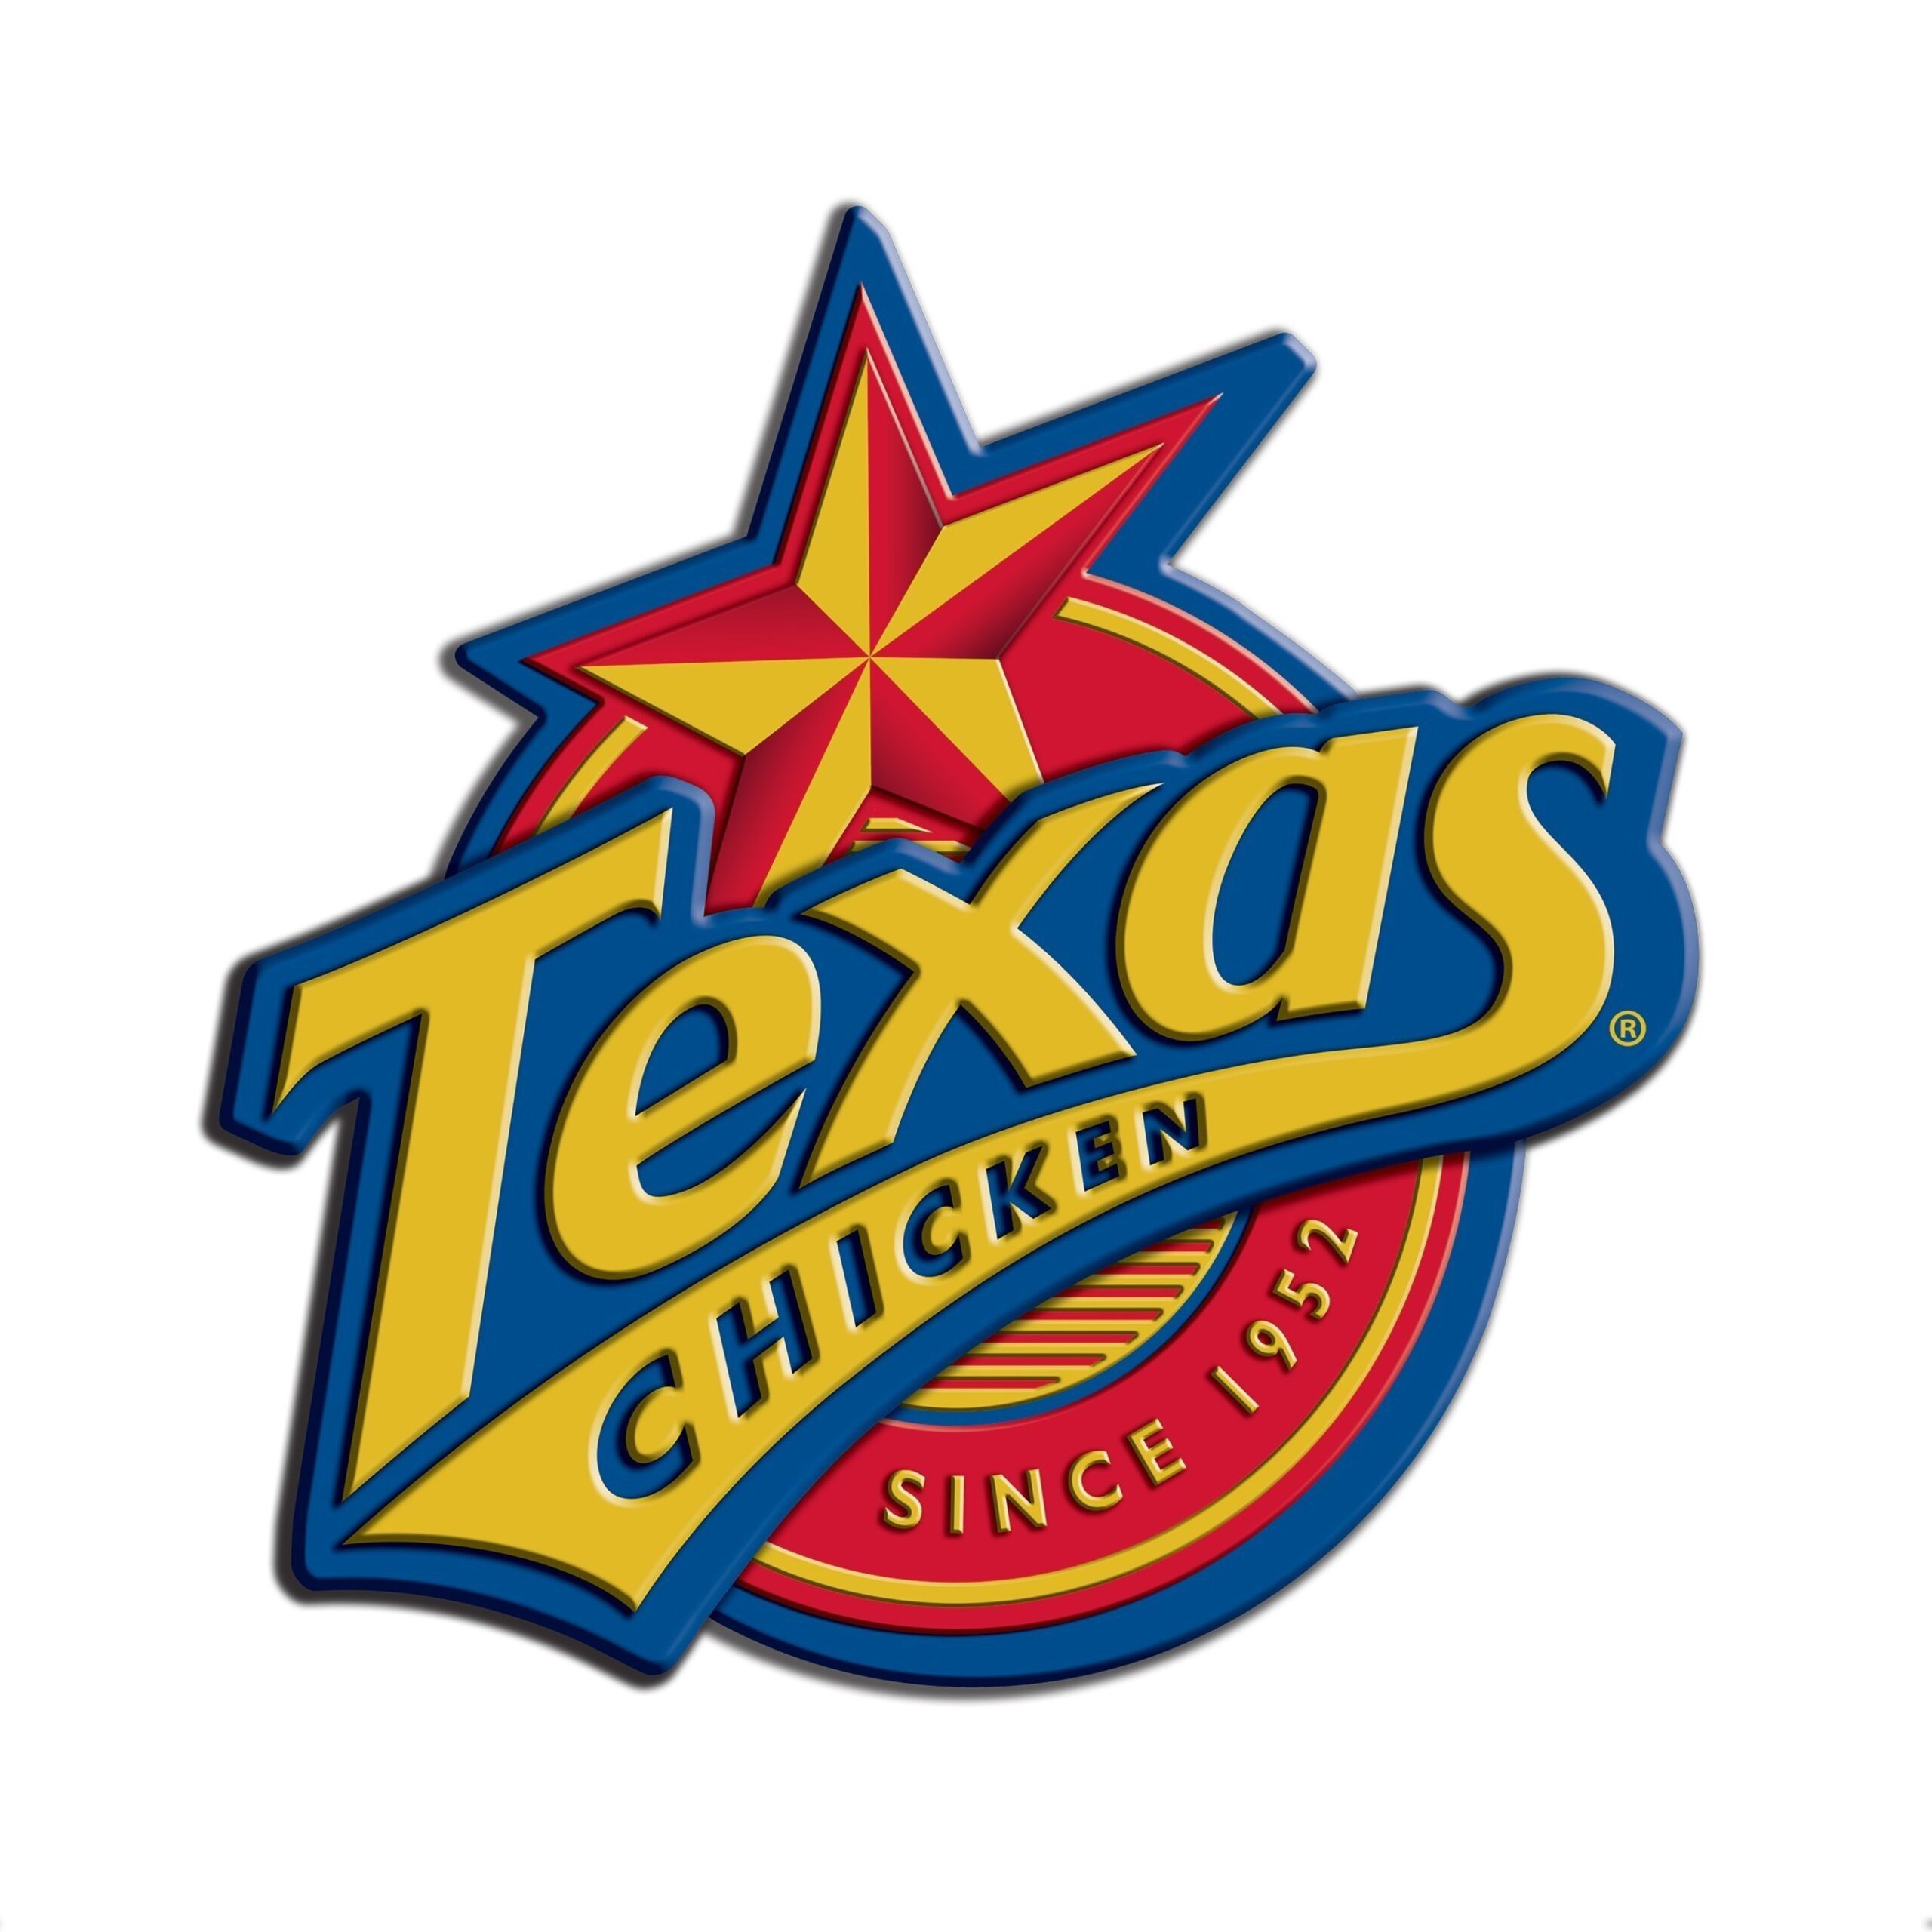 Texas Chicken and experienced restaurant franchise partner, The Olayan Group, announce the development of 63 new restaurants in the Middle East over the next several years. (PRNewsFoto/Texas Chicken)